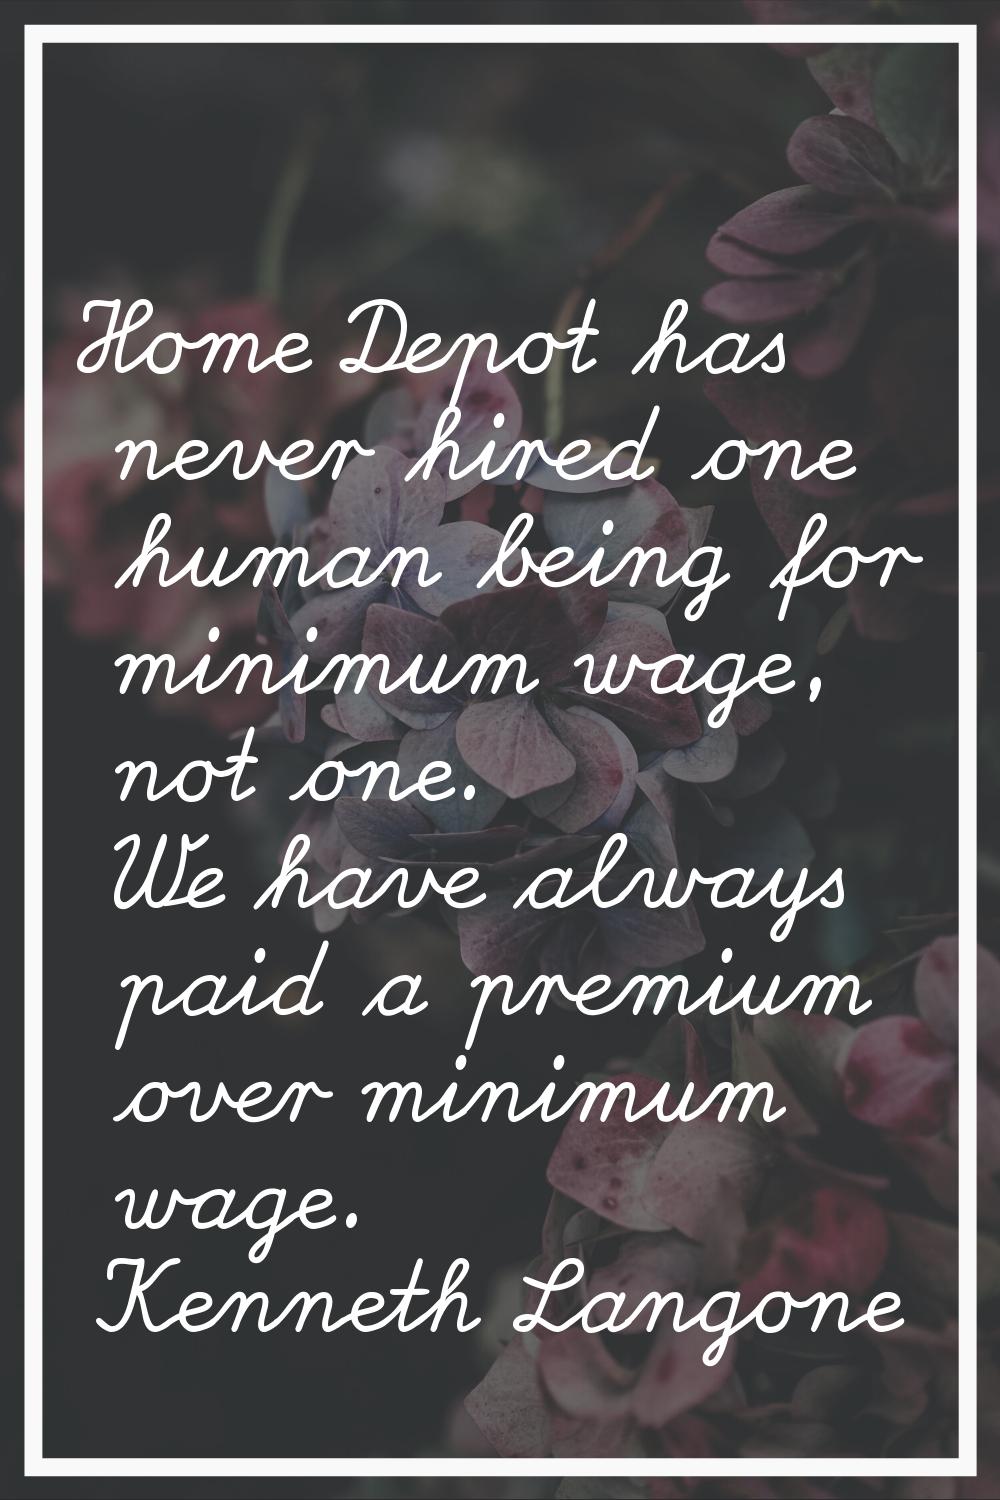 Home Depot has never hired one human being for minimum wage, not one. We have always paid a premium